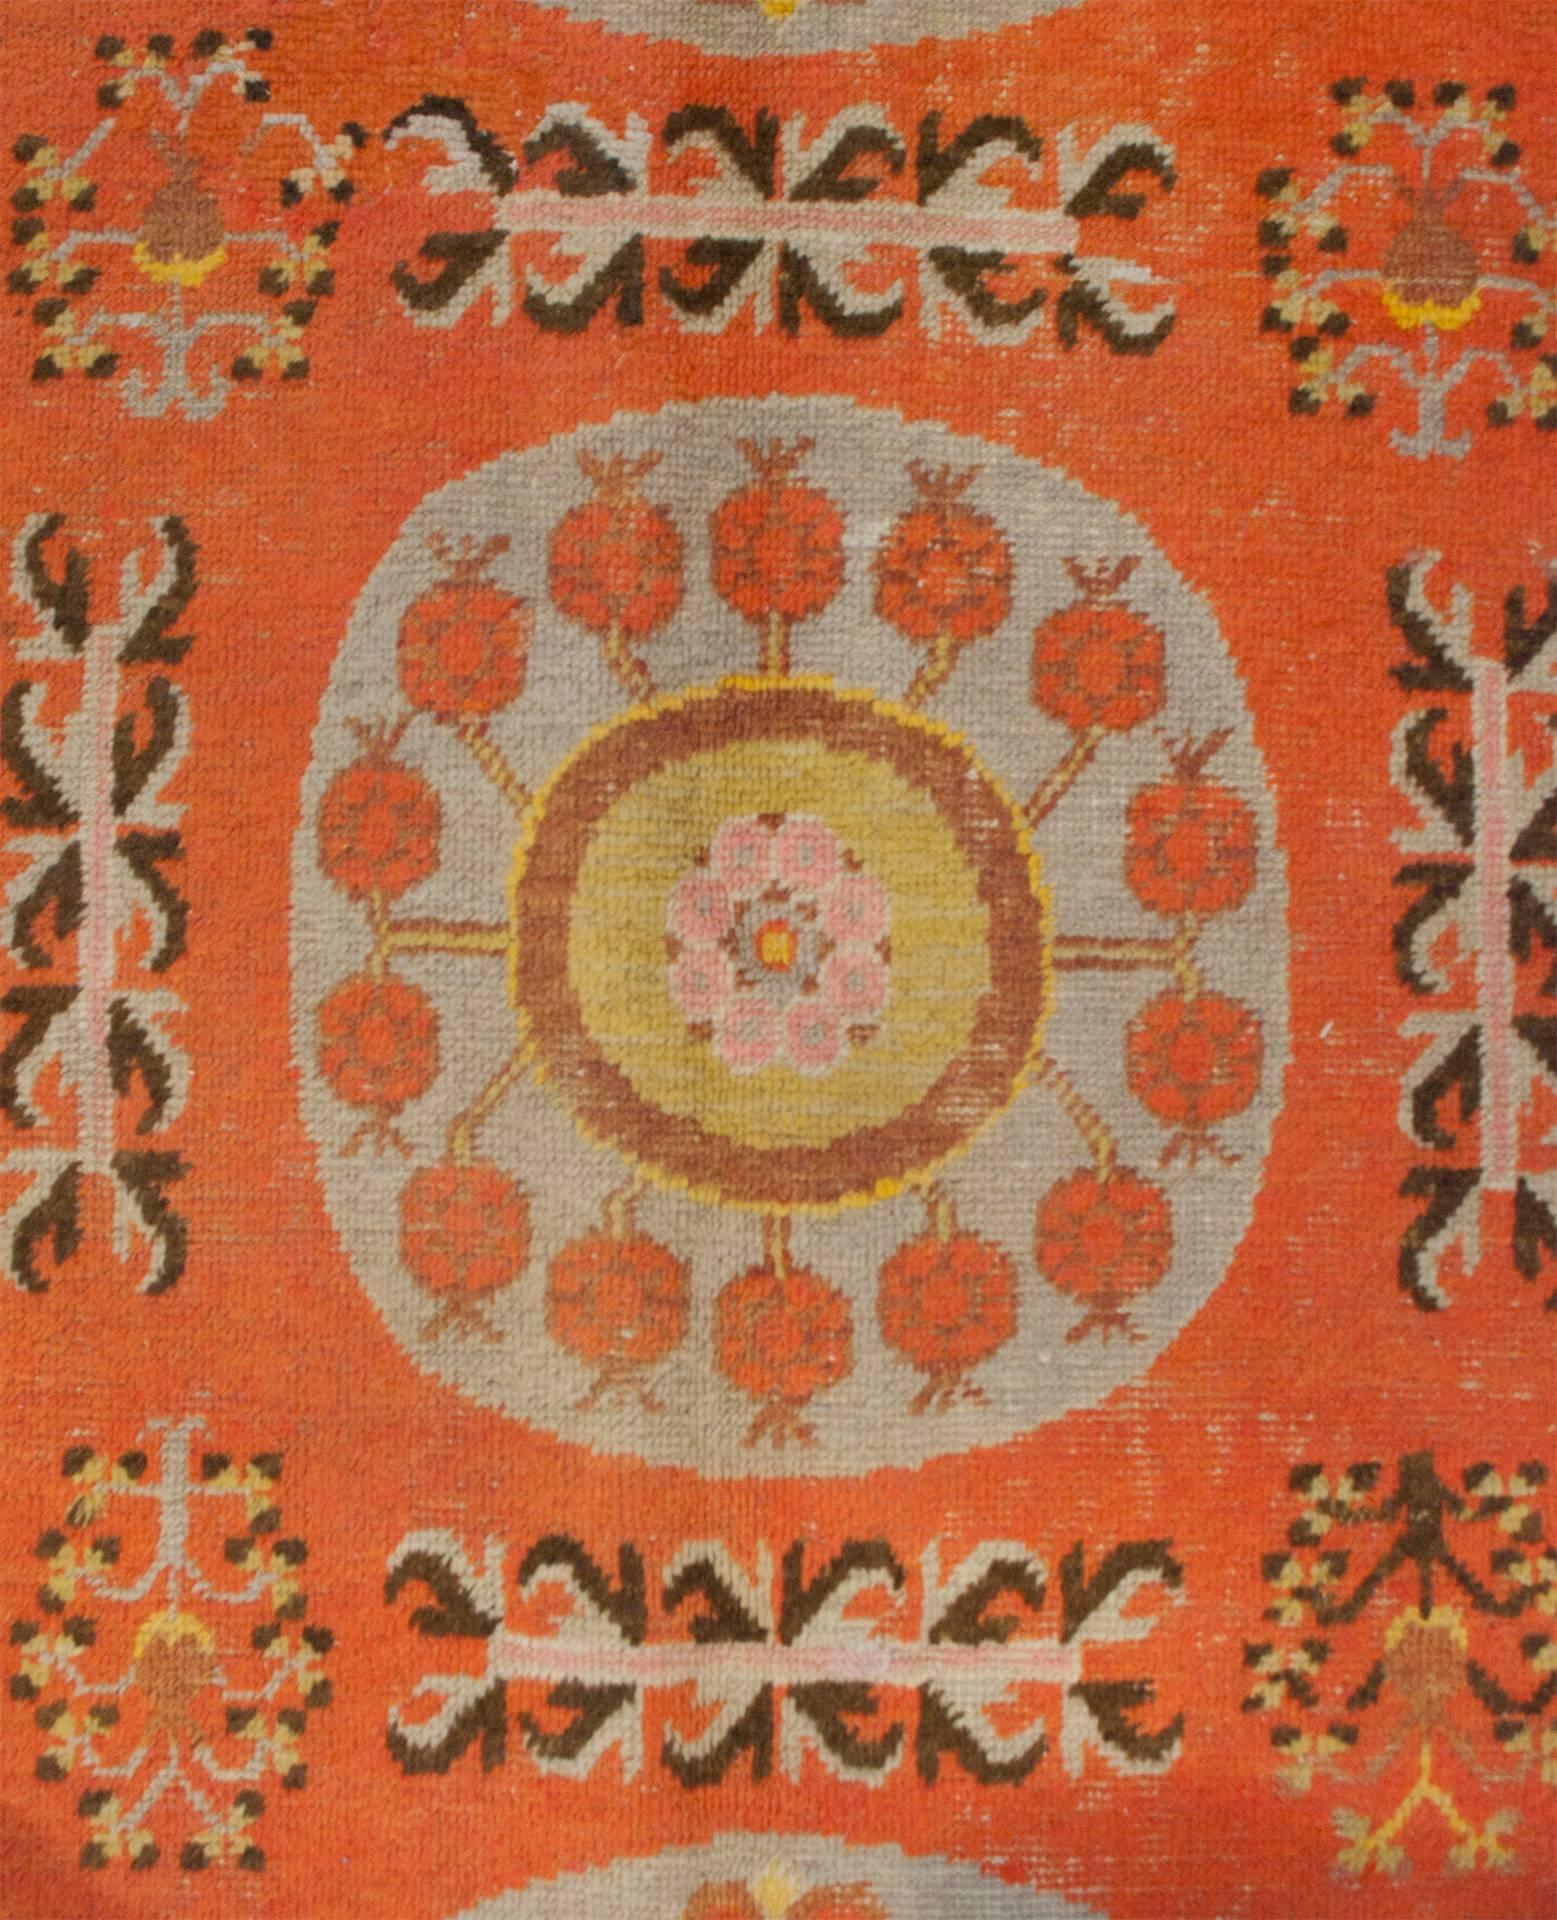 An early 20th century central Asian Khotan rug with three large circular light blue medallions with wonderful yellow, lime green, pink and orange floral patterns, on an orange background amidst a field of flowers. The rug is surrounded by three